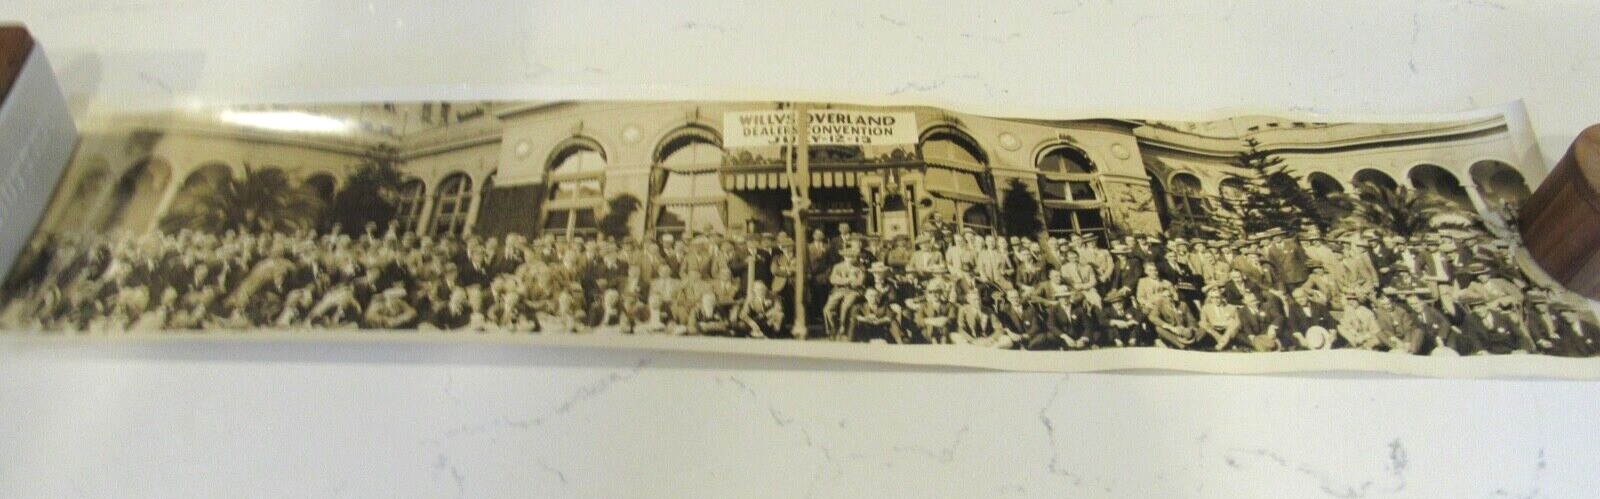 Willys Overland Dealer's Convention Huge Panoramic Photograph c1930 Oakland CA